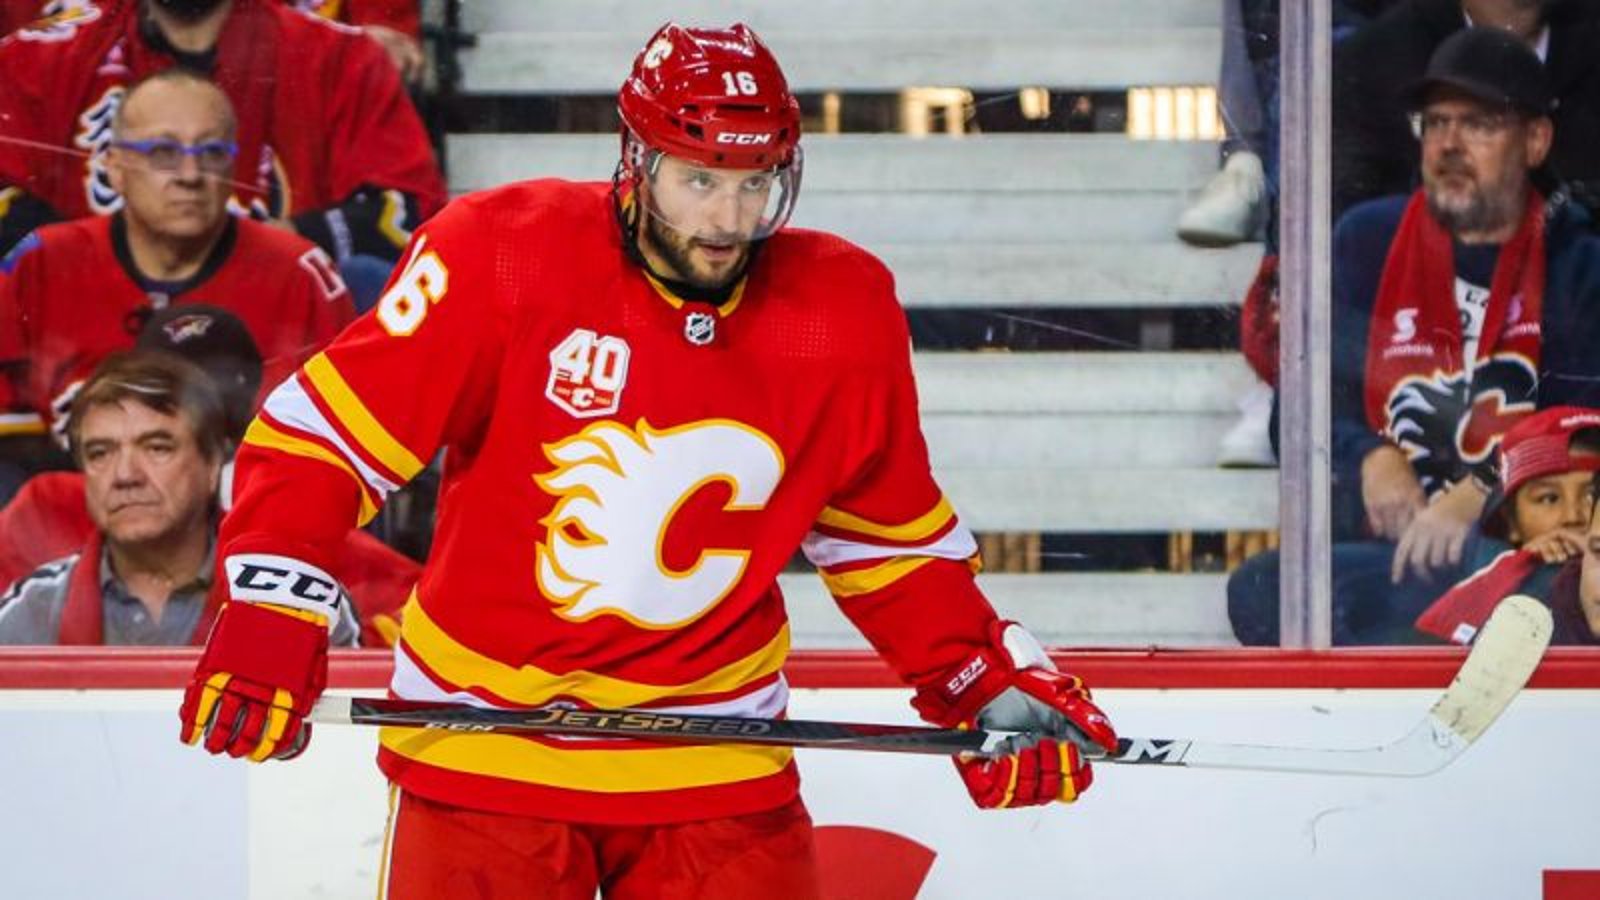 Flames place Tobias Rieder on waivers after just 9 games with the team.